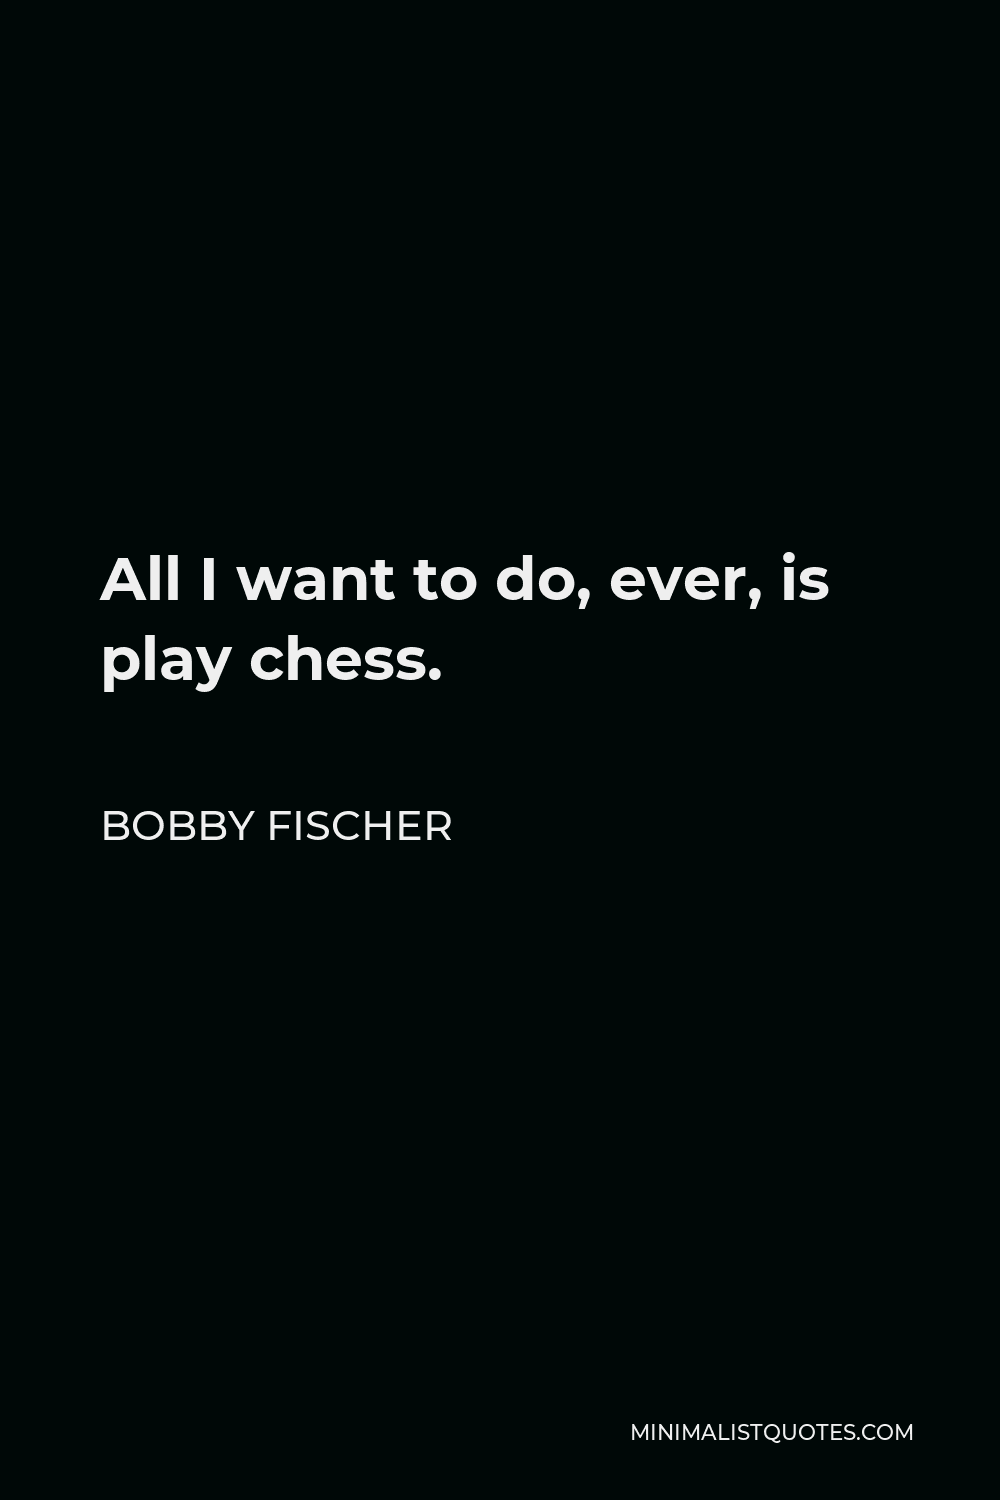 Bobby Fischer Quote - All I want to do, ever, is play chess.